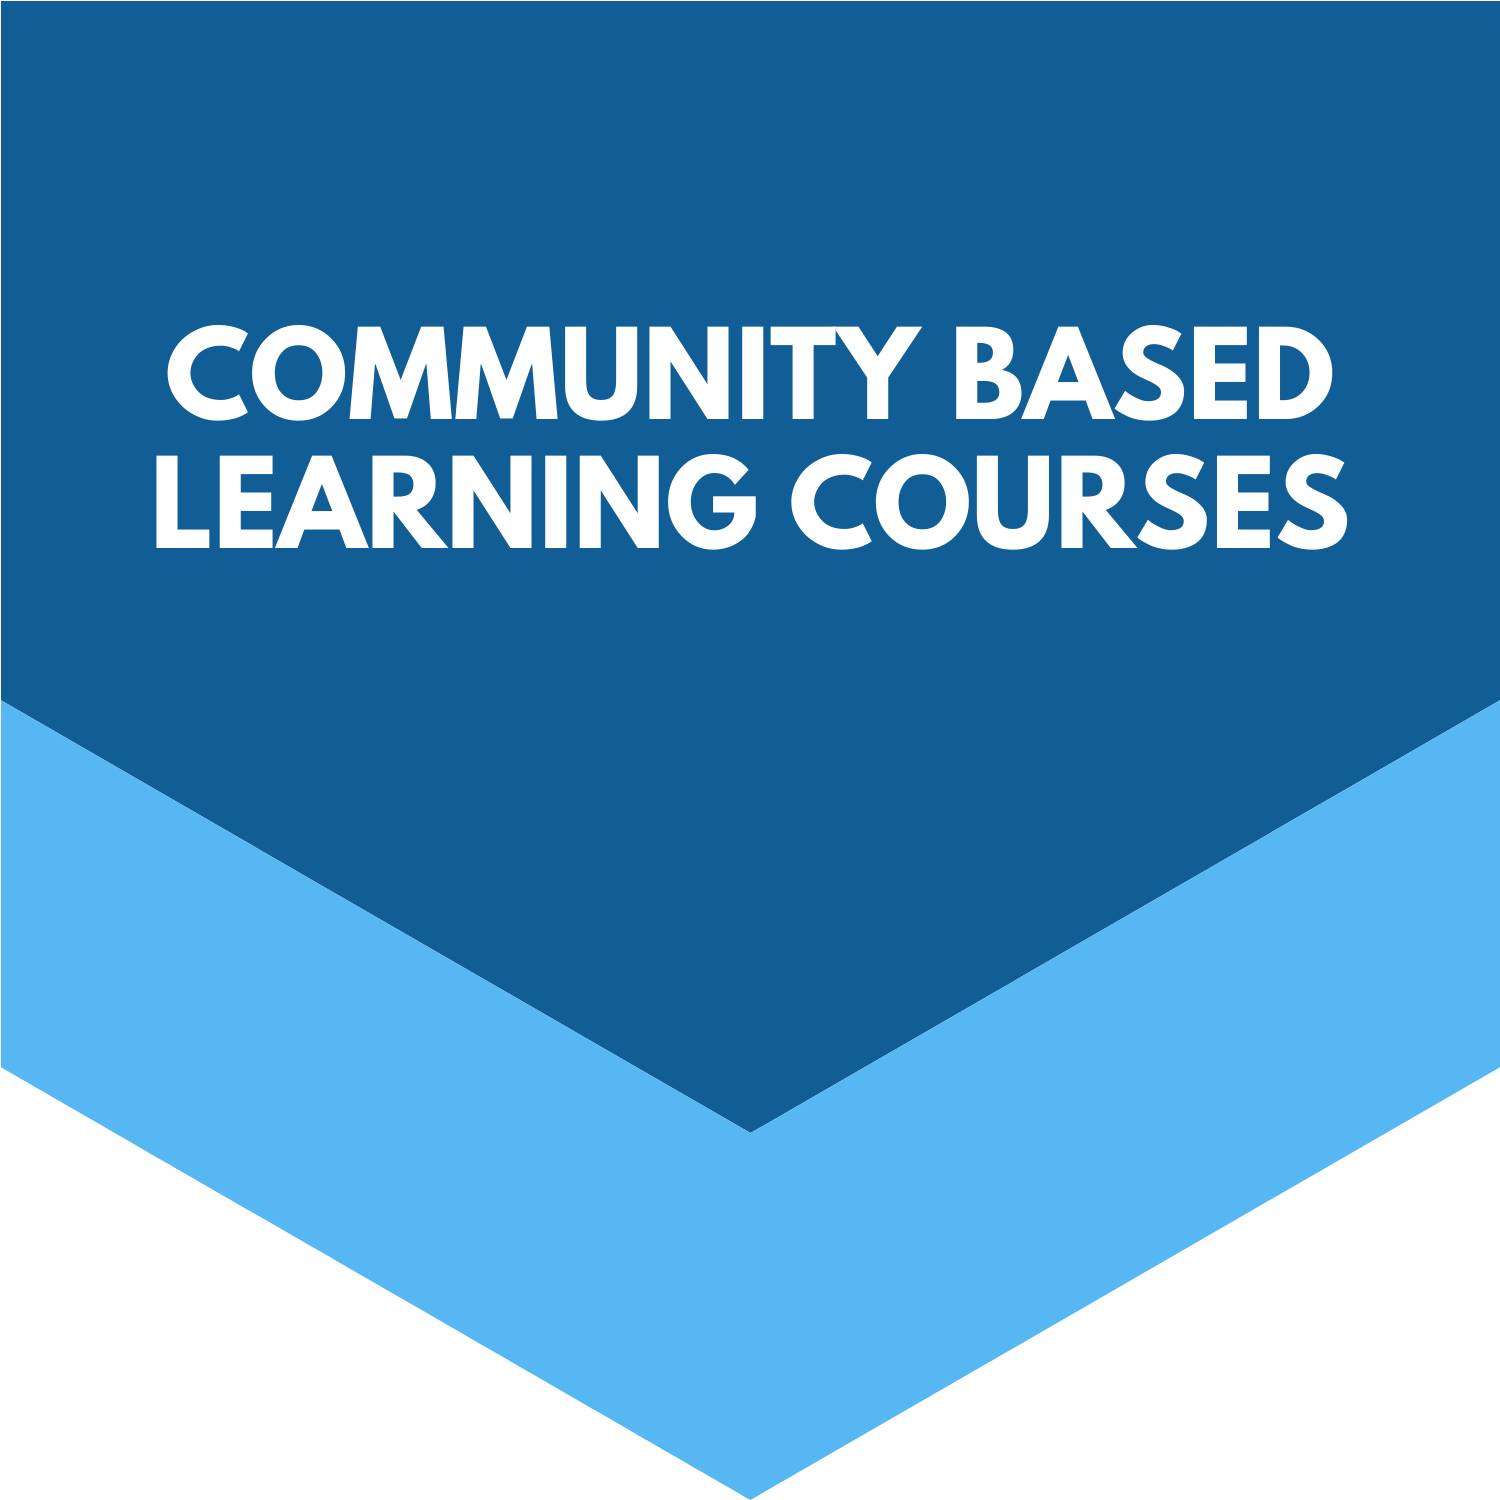 Community Based Learning Course Information